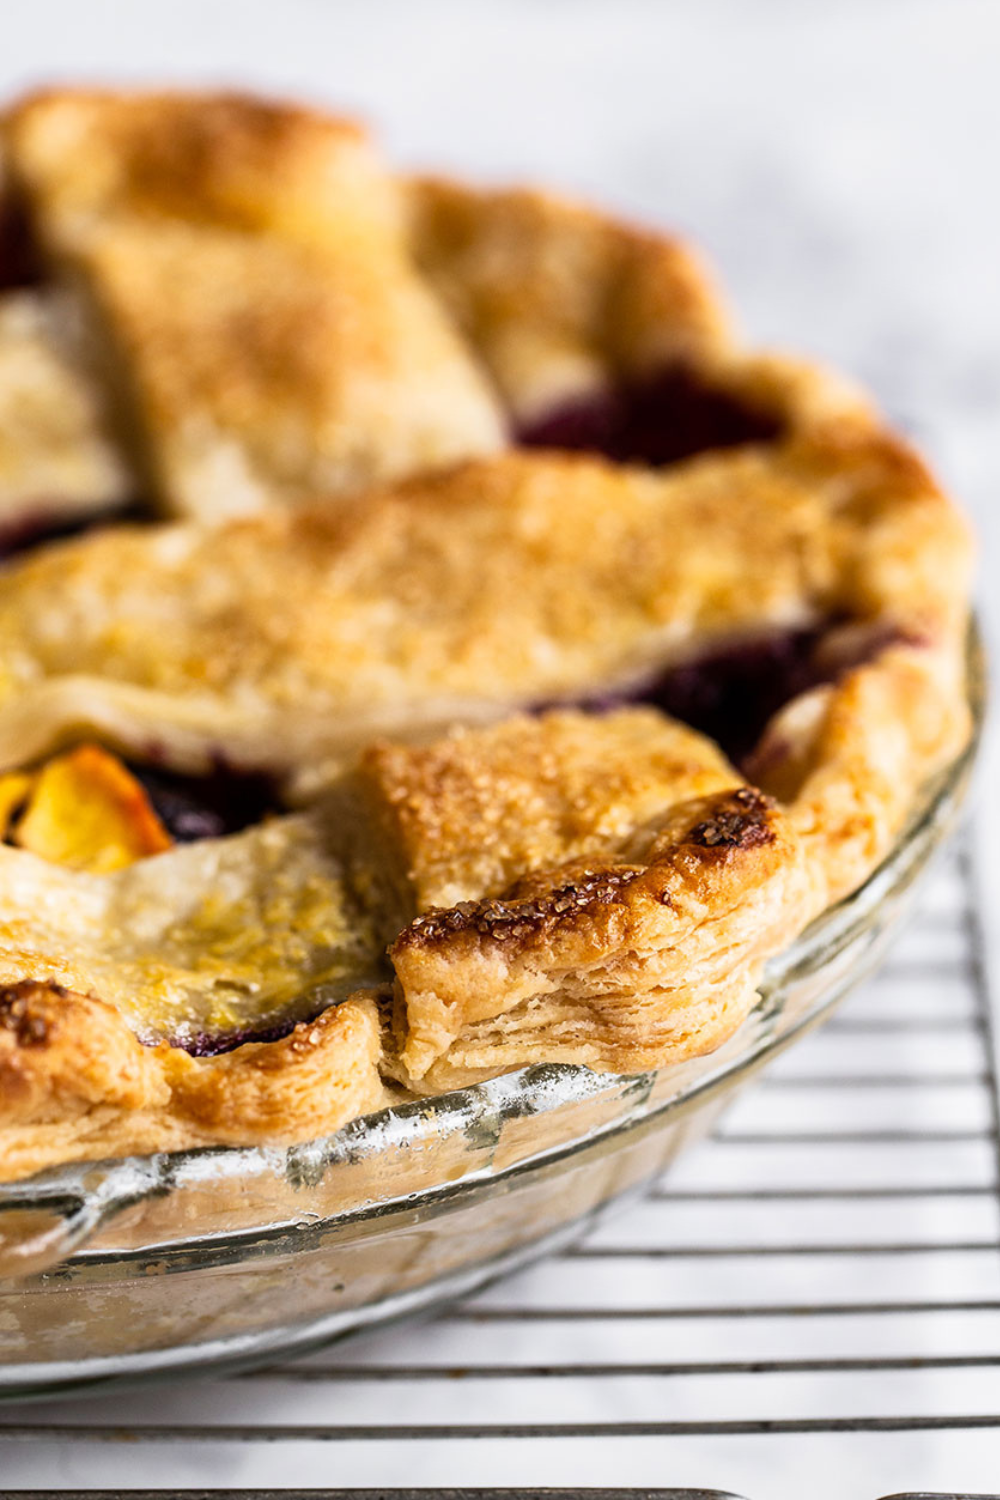 a baked blueberry peach pie topped with a visibly flaky, golden brown lattice pie crust.